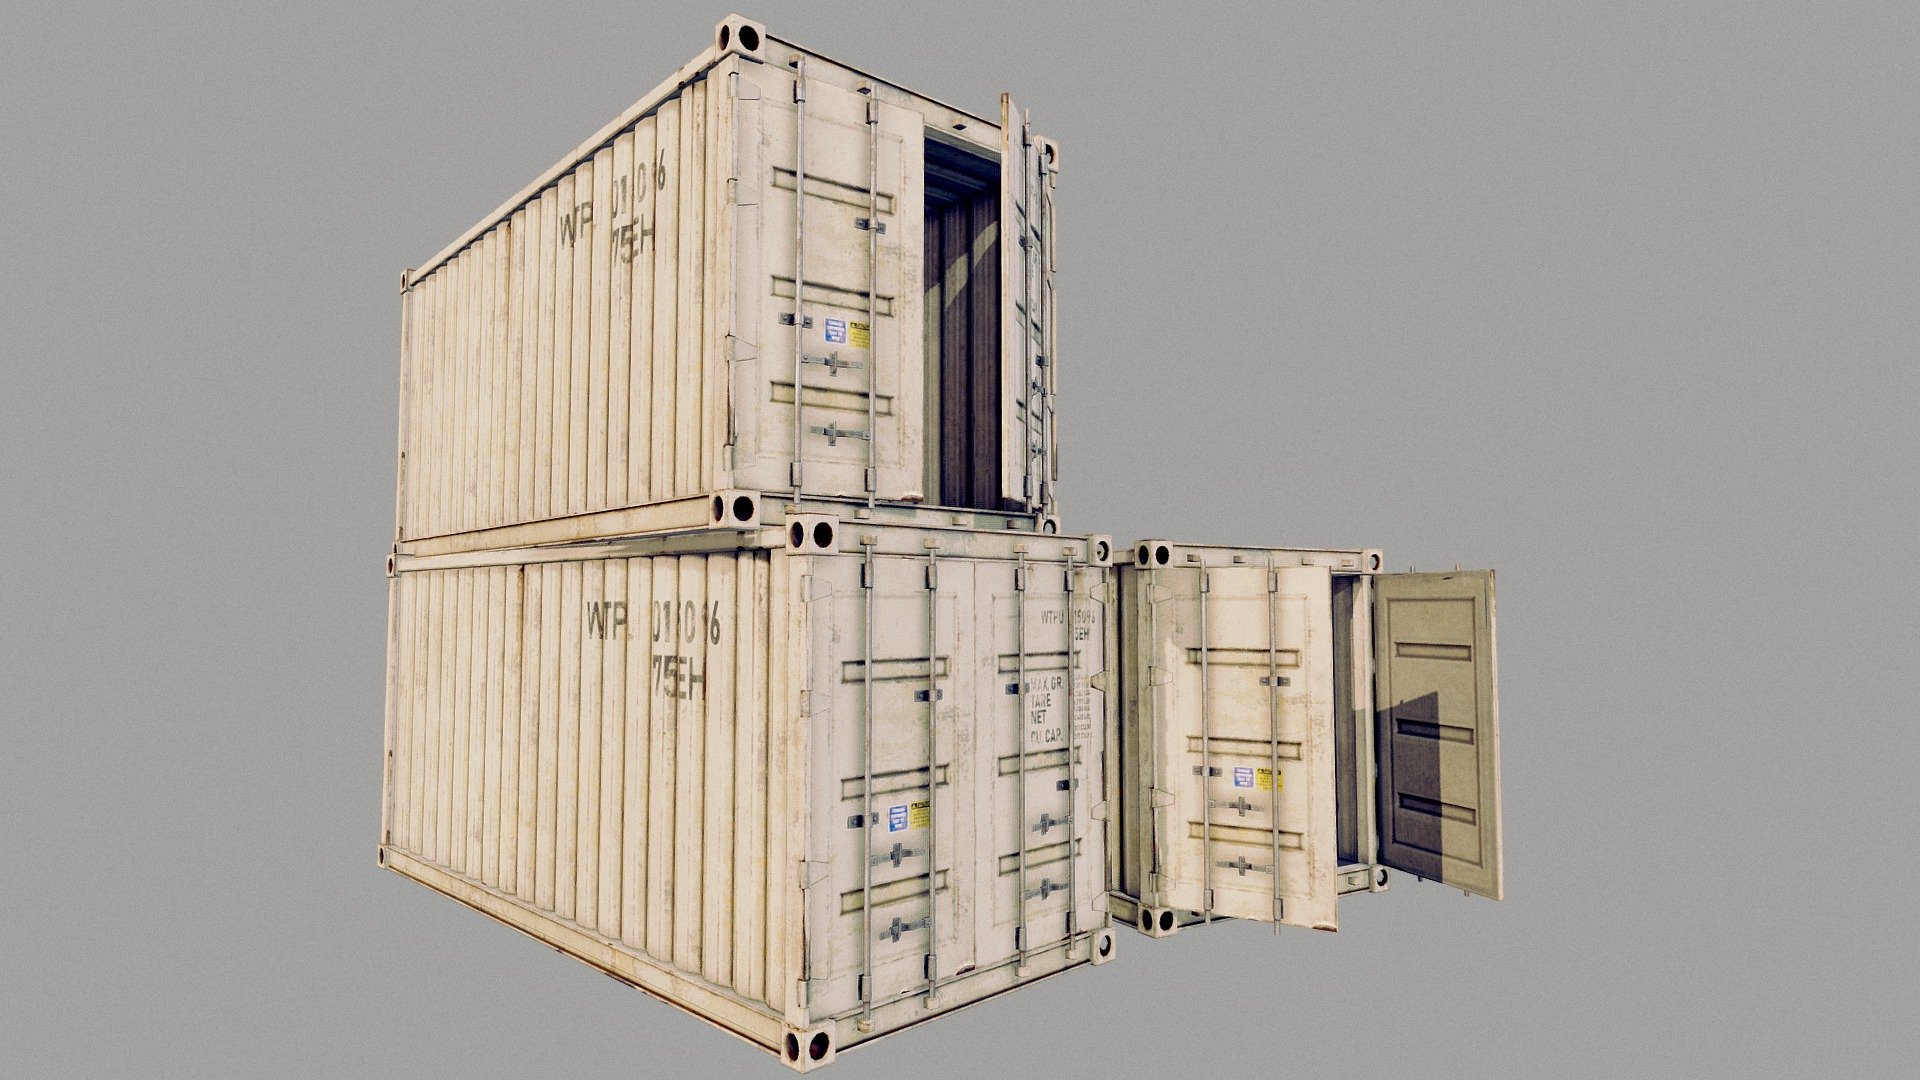 Enterable Shipping Container 02 - PBR

Very Detailed Low Poly Shipping Container with Interior, with High-Quality PBR Textures.

Because several Requests, i have made this new container which have interior.

Stickers and texts are custom made in photoshop.

Doors can be opened

Fits perfect for any PBR game as Environment Decoration etc.

Created with 3DSMAX, Zbrush and Substance Painter.

Standard Textures
Base Color, Metallic, Roughness, Height, AO, Normal, Maps

Unreal 4 Textures
Base Color, Normal, OcclusionRoughnessMetallic

Unity 5/2017 Textures
Albedo, SpecularSmoothness, Normal, and AO Maps

2x4096x4096 TGA Textures

Please Note, this PBR Textures Only. 

Low Poly Triangles 

7454 Tris
4530 Verts

File Formats :

.Max2019
.Max2018
.Max2017
.Max2016
.FBX
.OBJ
.3DS
.DAE - Enterable Shipping Container 02 - PBR - Buy Royalty Free 3D model by GamePoly (@triix3d) 3d model